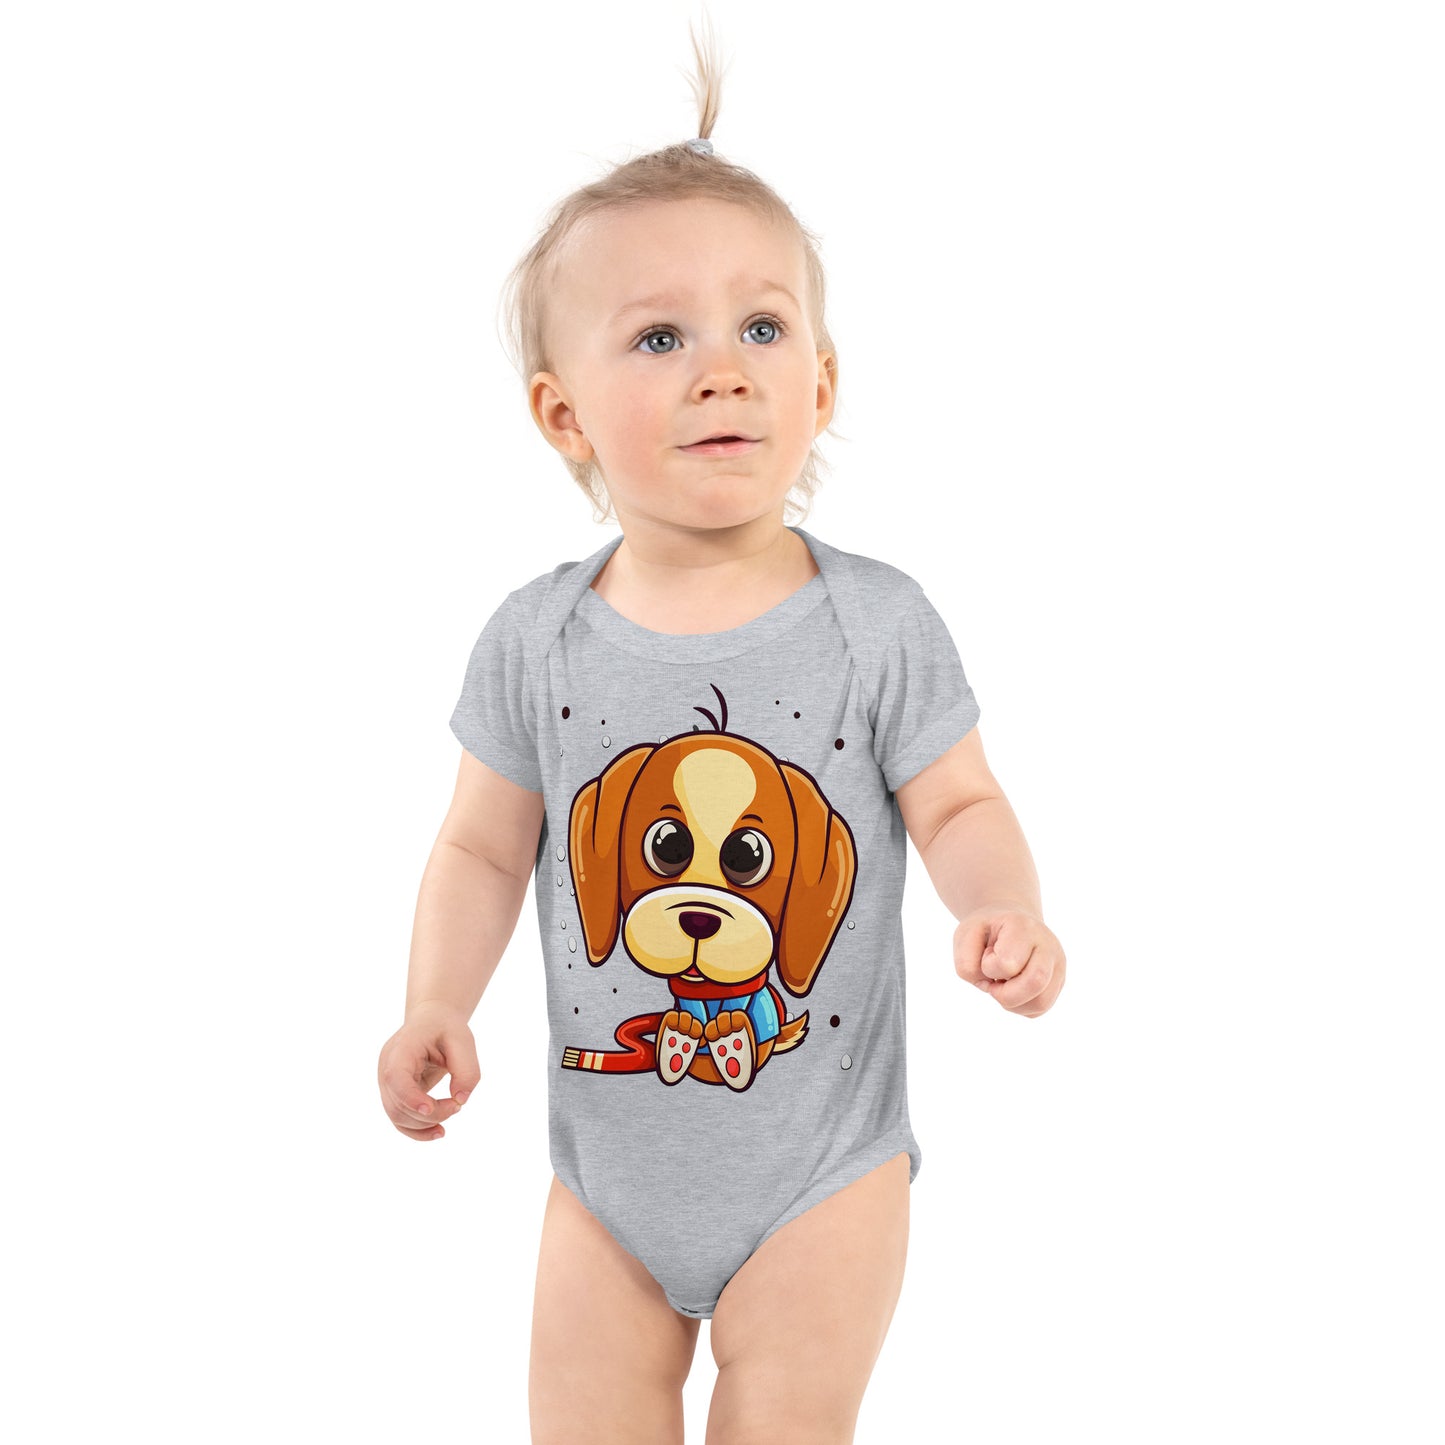 Cute Puppy Dog Wearing Winter Outfits Bodysuit, No. 0372